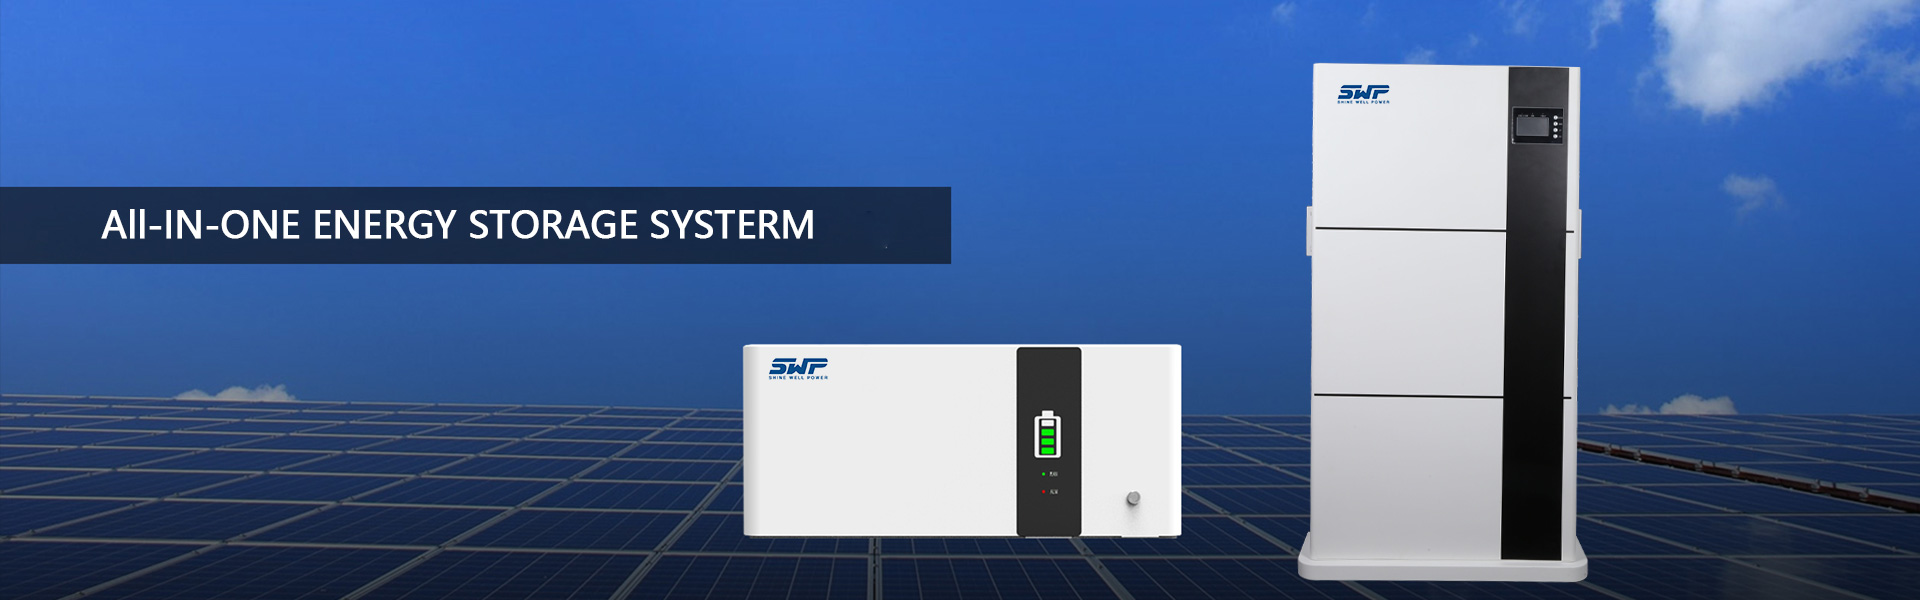 energy storage system battery,commercial energy storage systems,wall mounted battery,Shenzhen Shine Well Power Technology Co.,Ltd